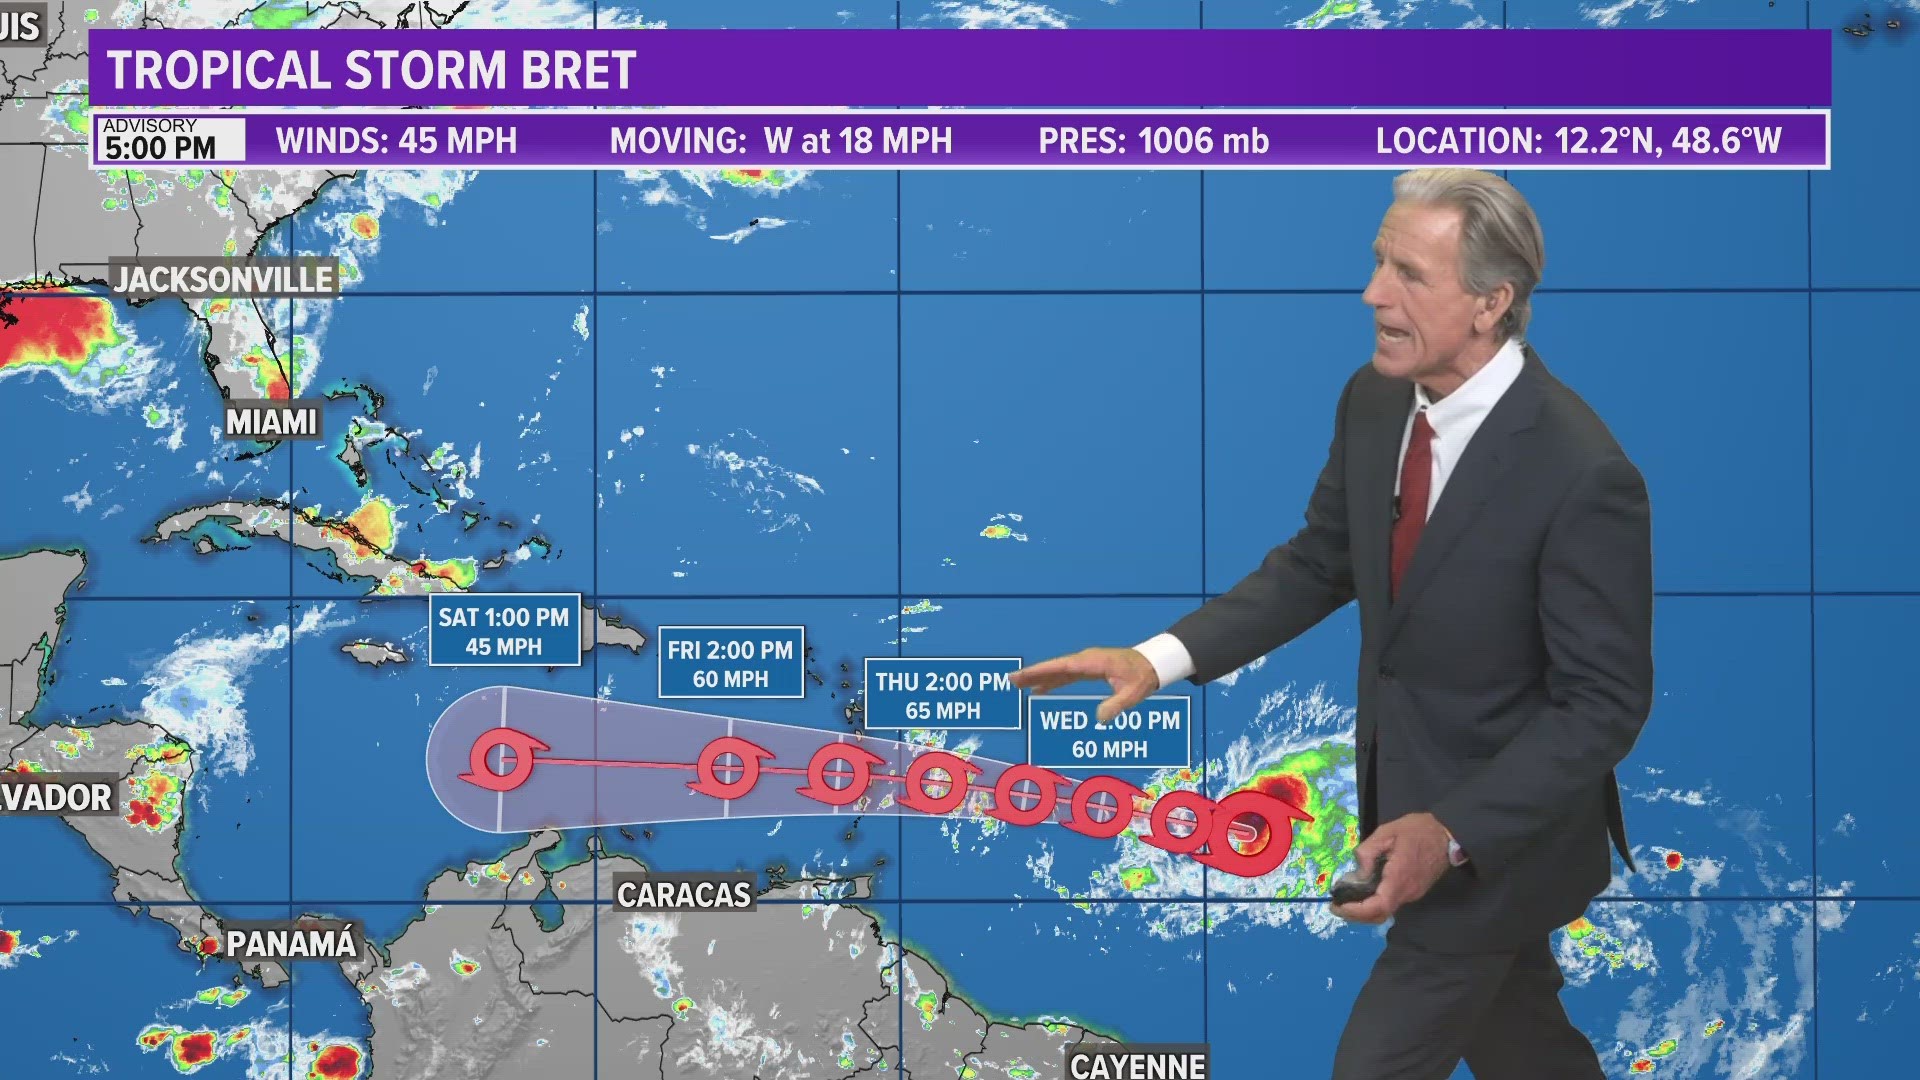 Is Tropical Storm Bret hitting Florida? What about the rest of the East Coast? Will it hit the United States at all? We're tracking the trajectory.